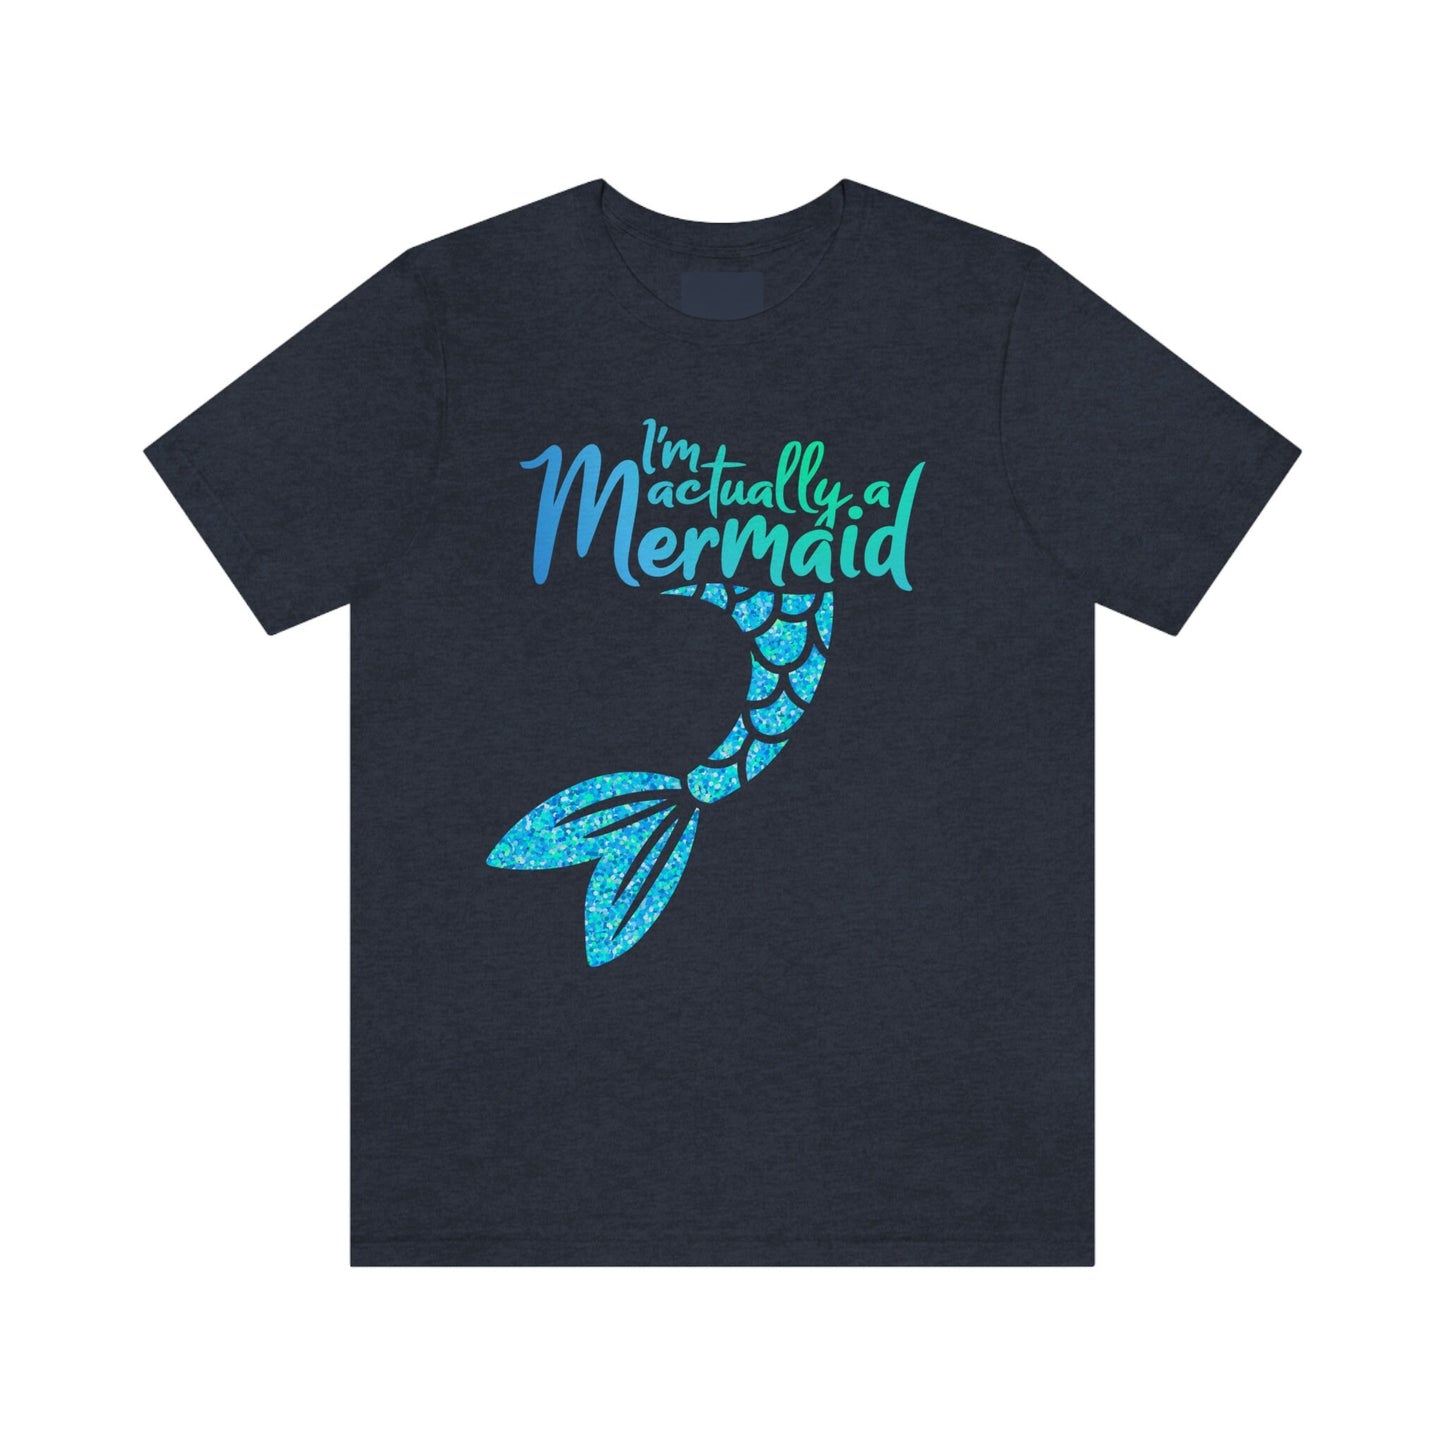 Funny Mermaid T Shirt for wife, sister or daughter, Funny Gift Shirt for your fellow mermaid-loving friends